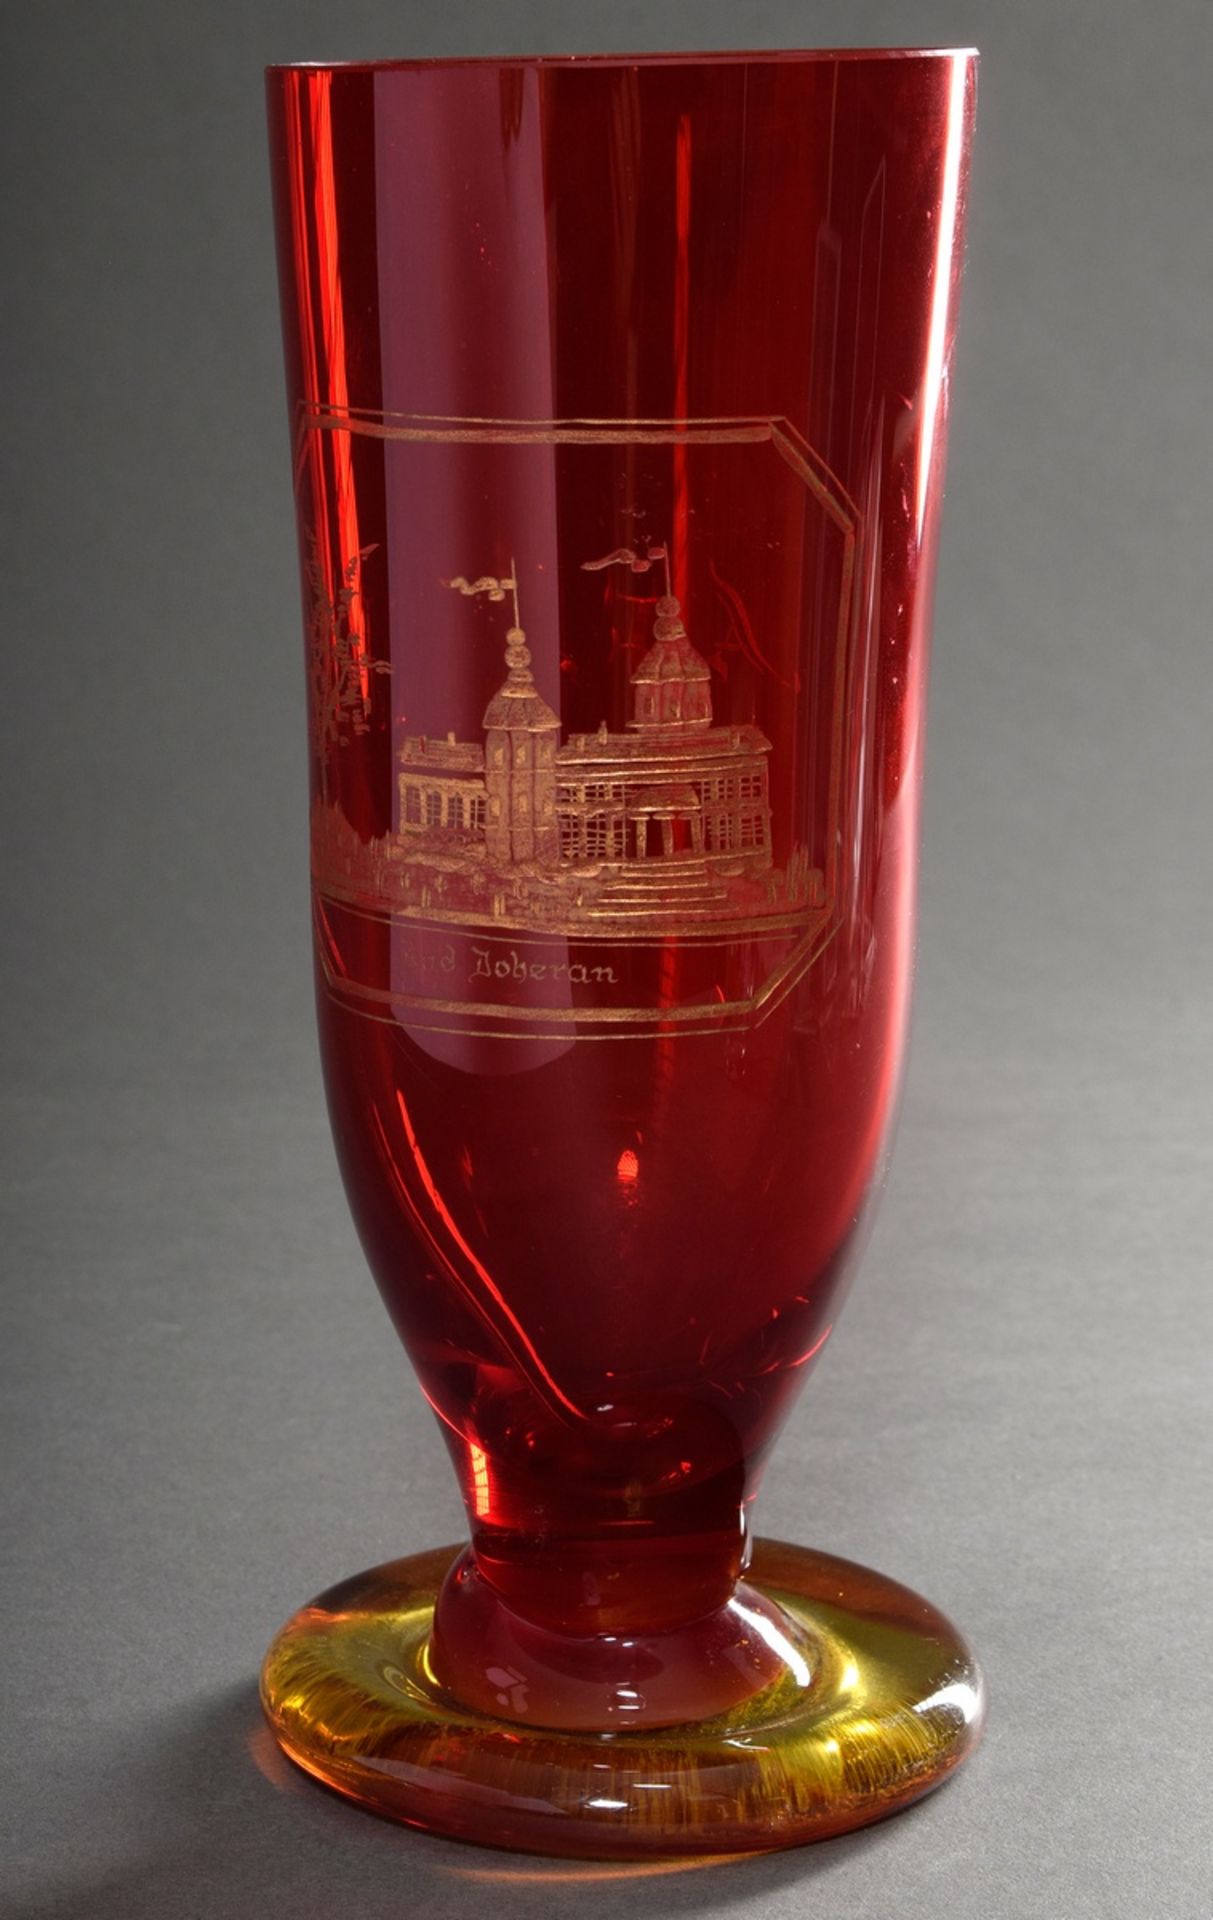 Tall red Biedermeier bath glass with finely cut, gilded view "Bad Doberan" and monogram "A.F" on a 